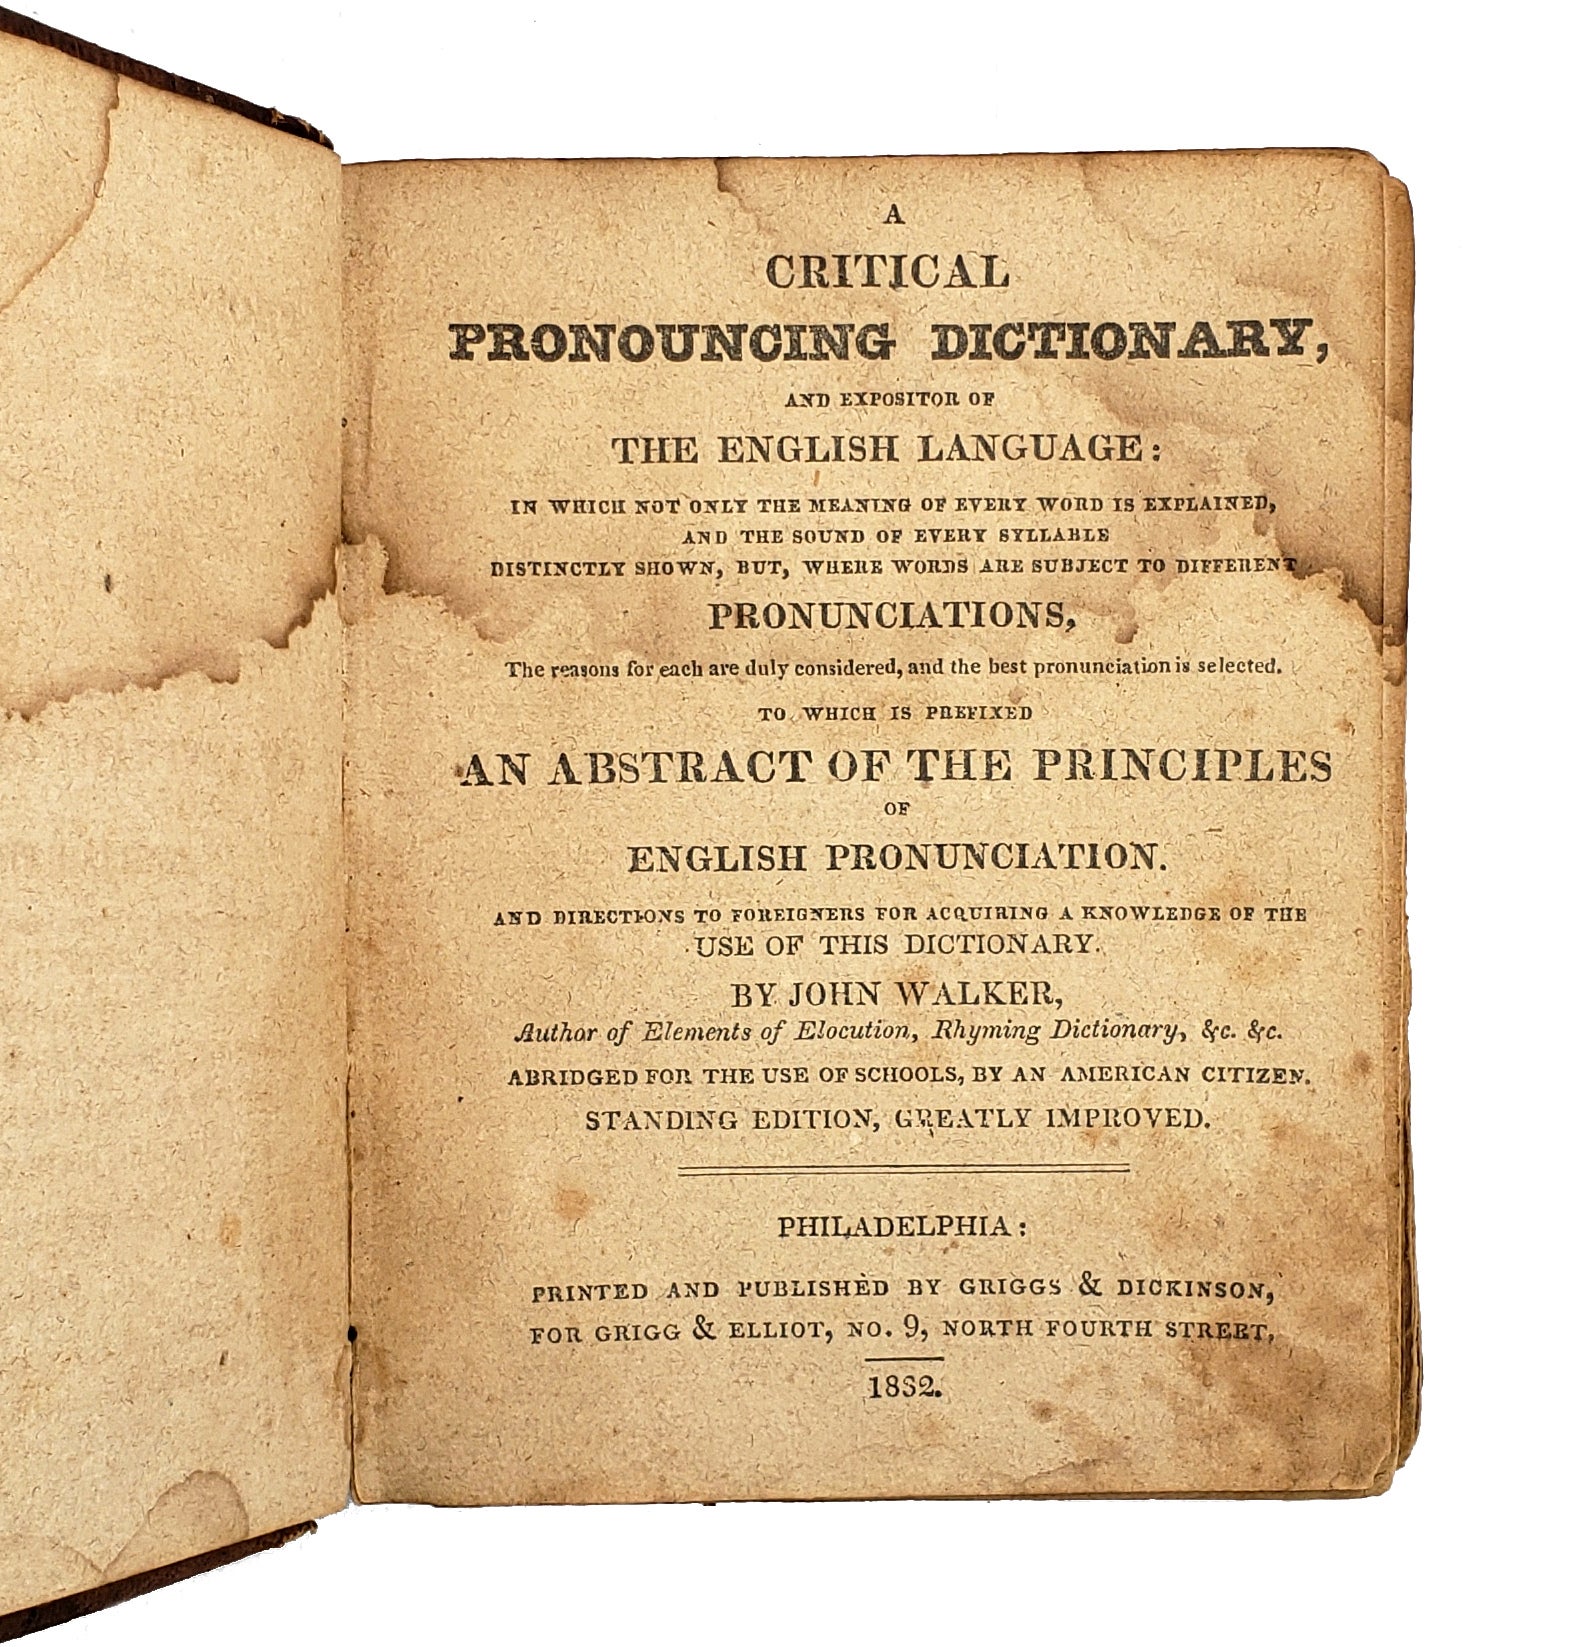 Image 178 of A dictionary of the English language, explanatory,  pronouncing, etymological, and synonymous, with a copious appendix.